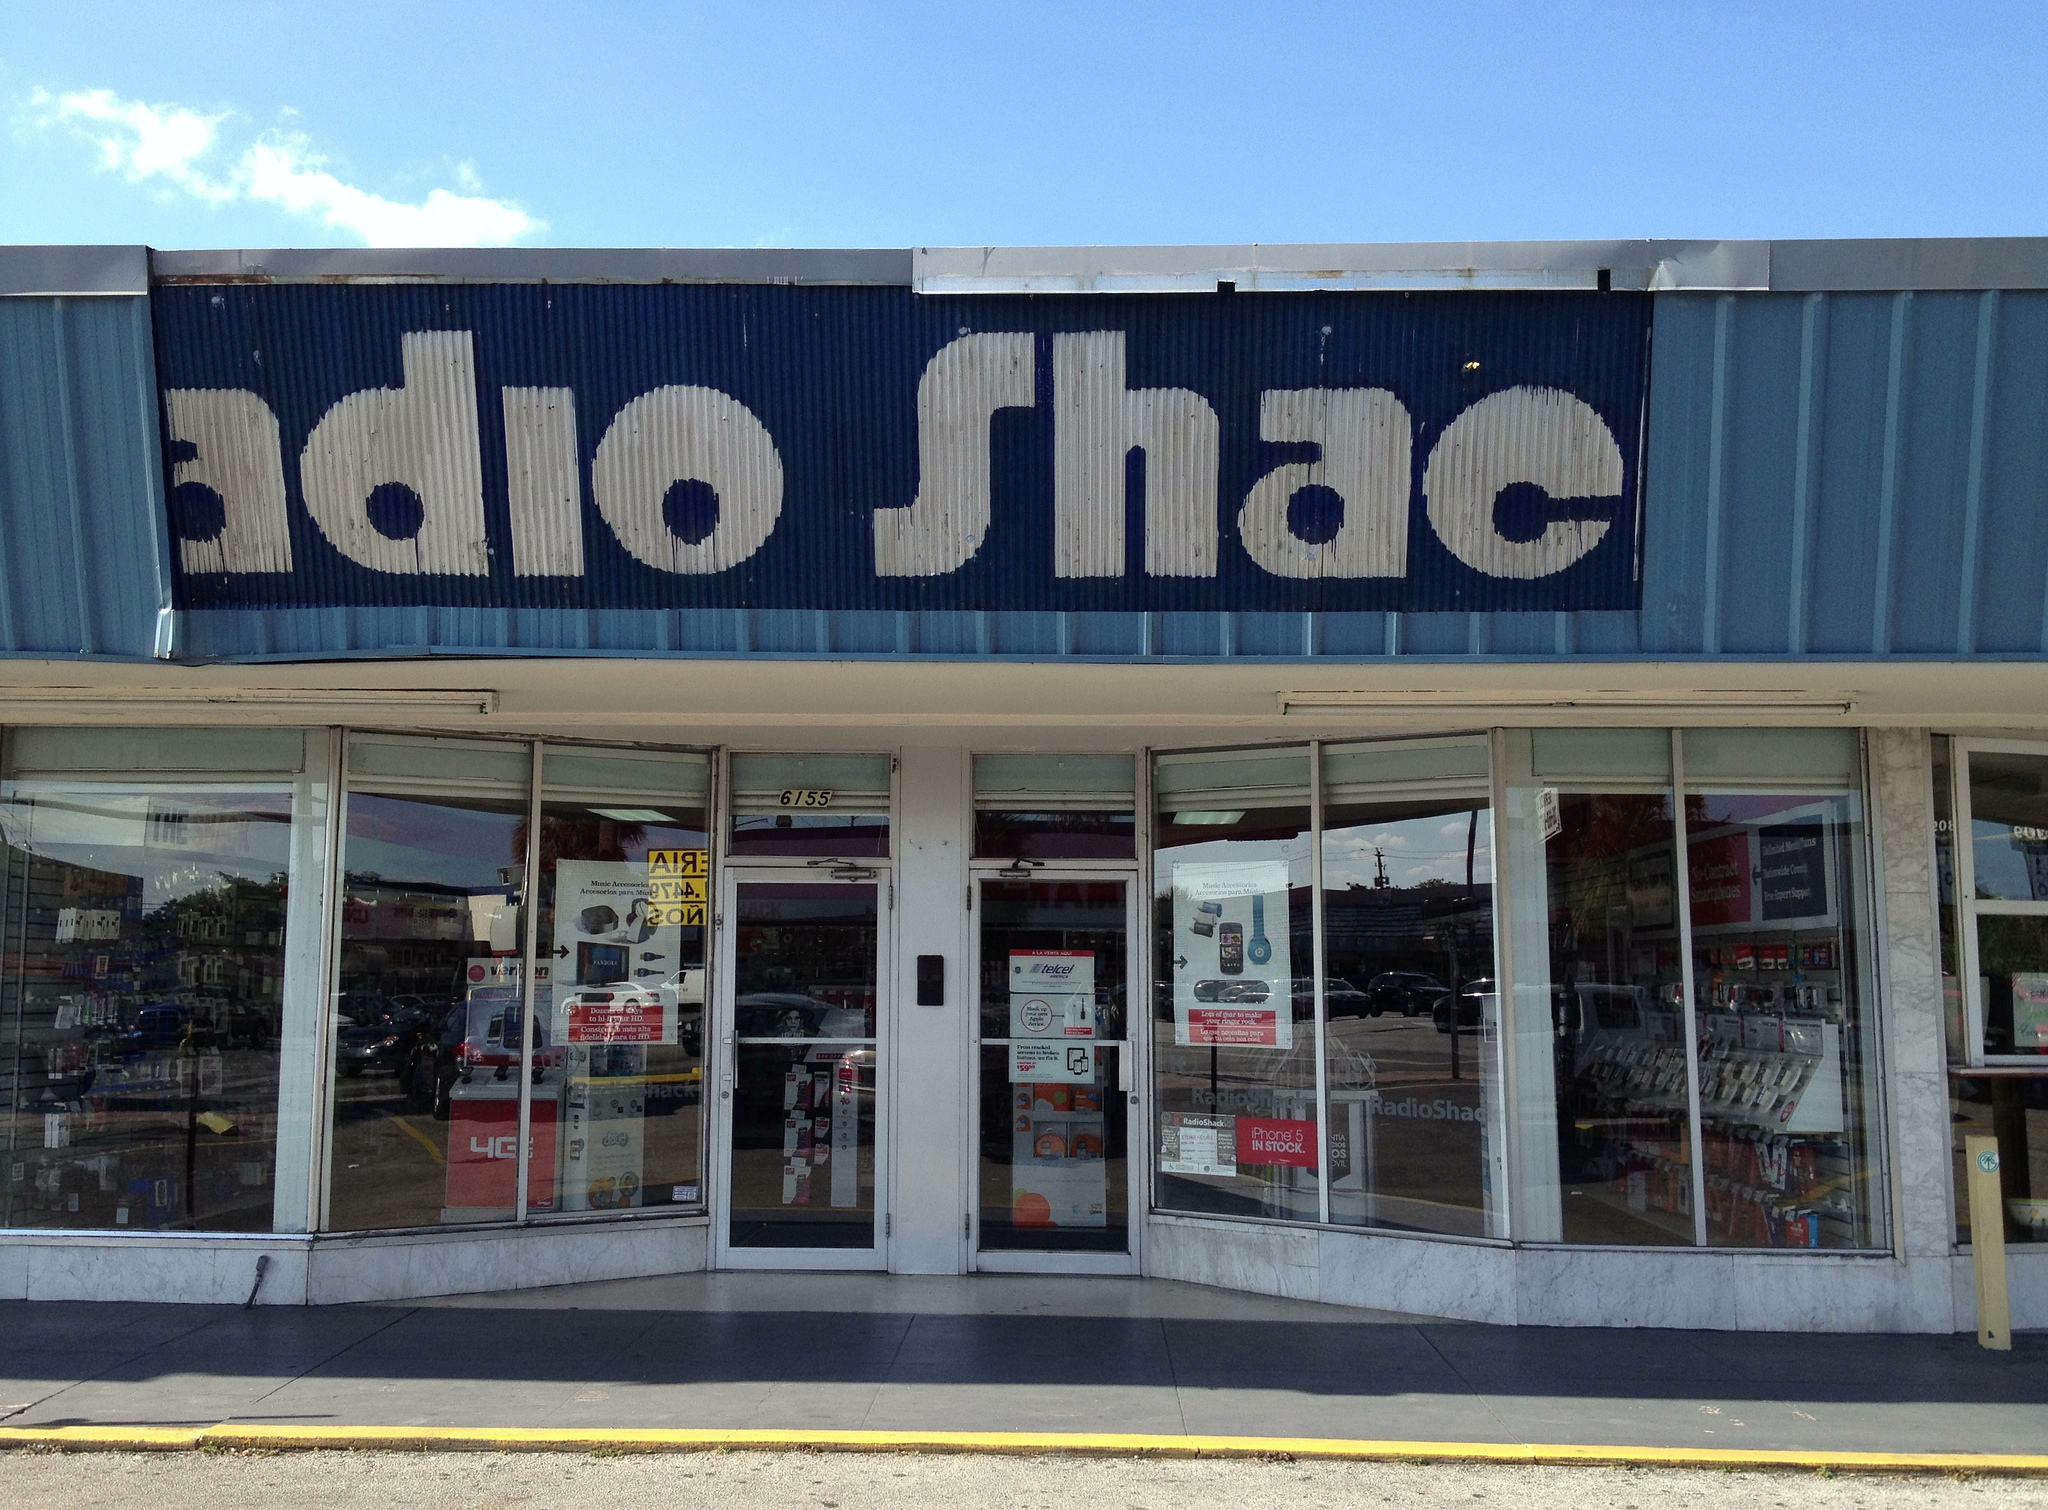 Sale Of 1,100 Radio Shack Leases Approved